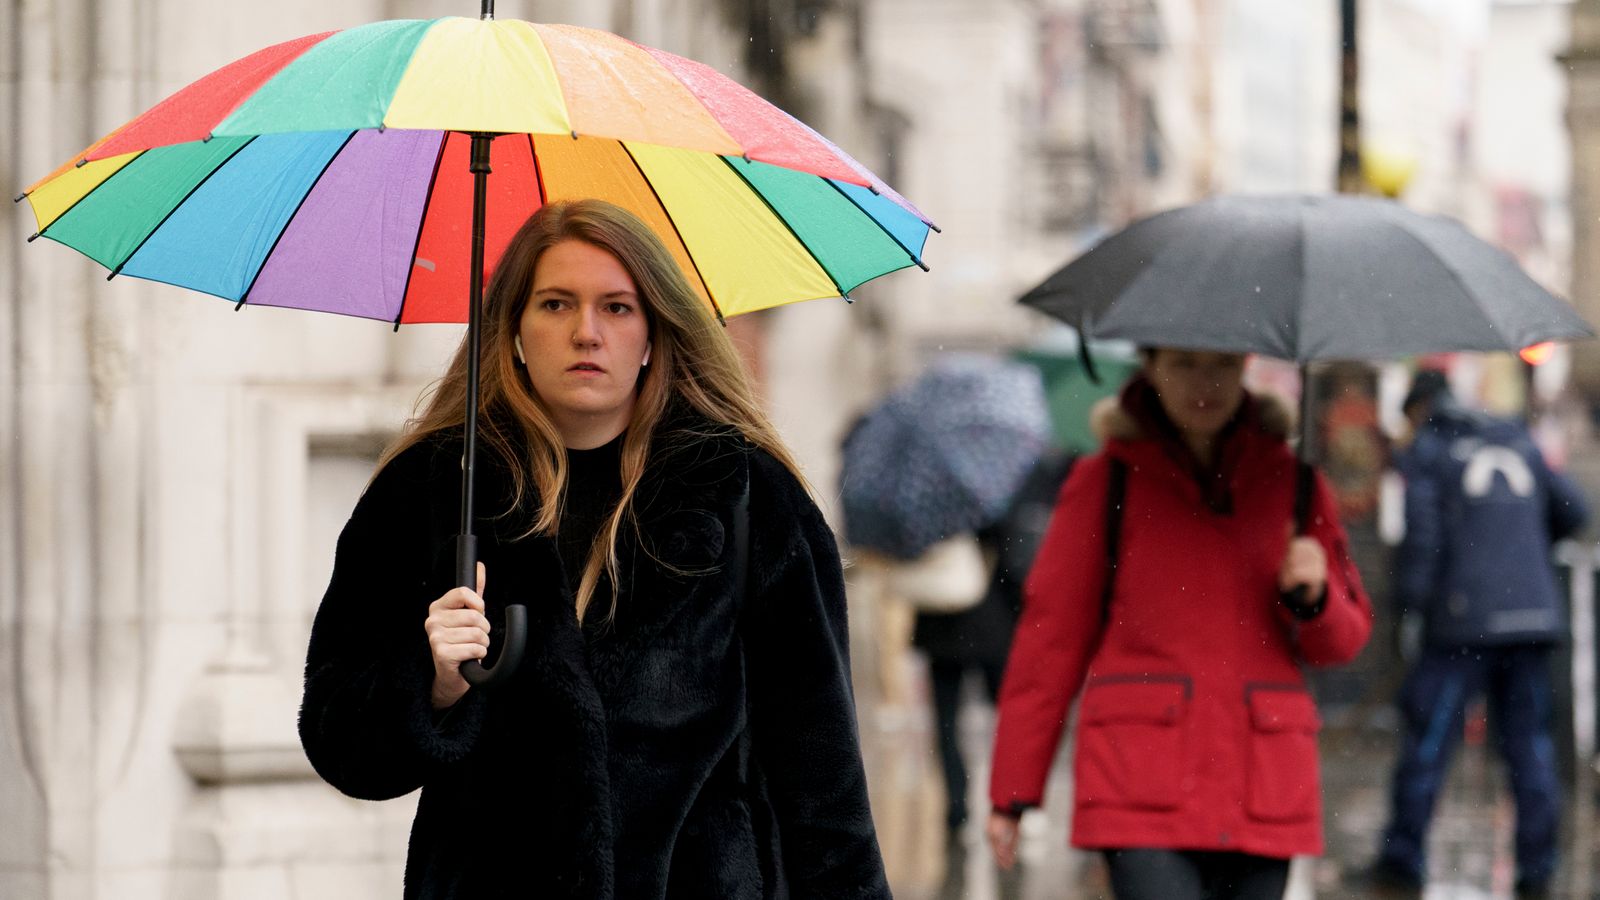 UK weather: Met Office issues warnings as heavy rain forecast for many areas